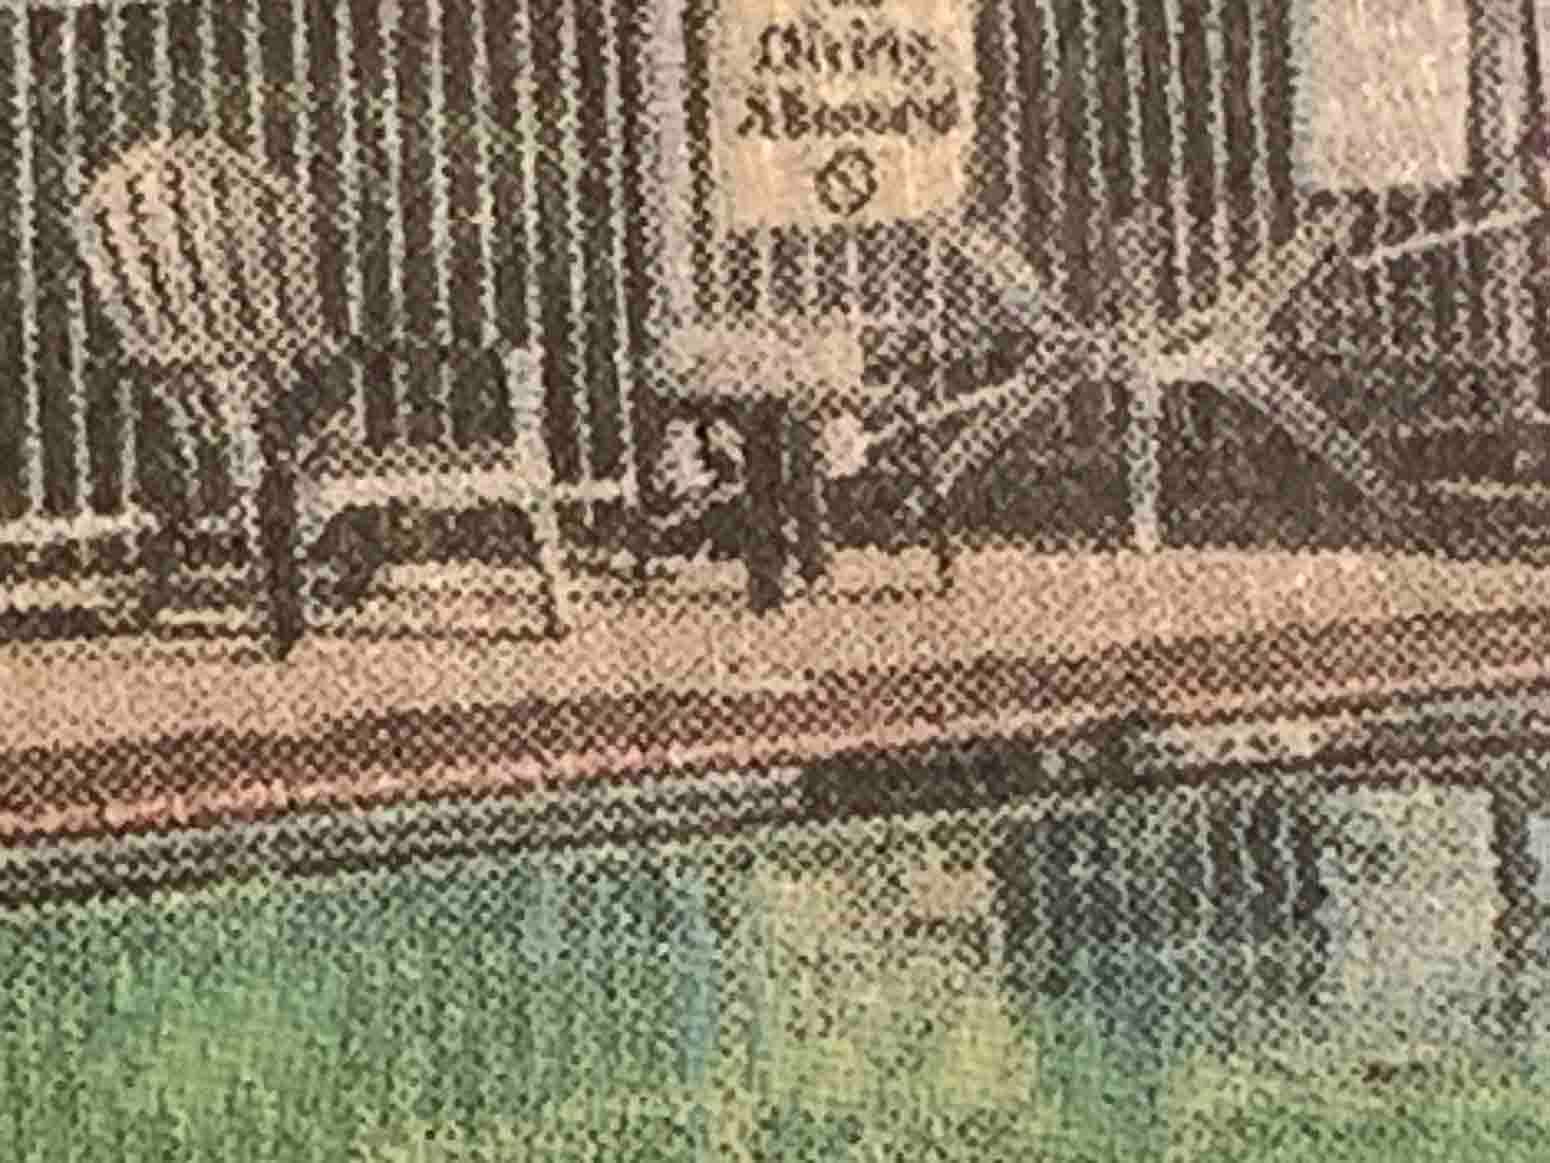 Indignity Morning Podcast No. 139: The serial drone bombing of swimming pools with dye packets.